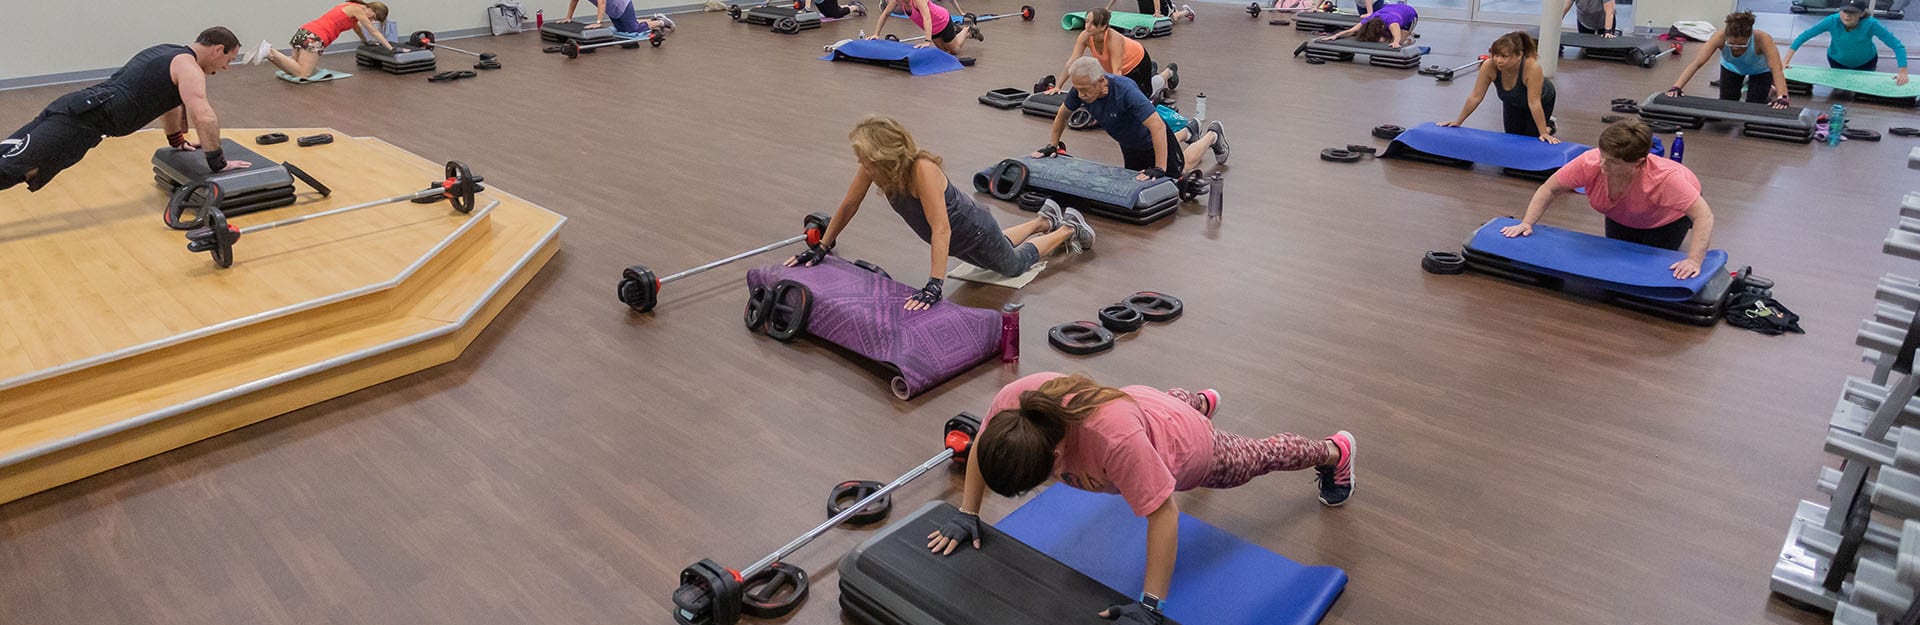 group fitness class at modern gym